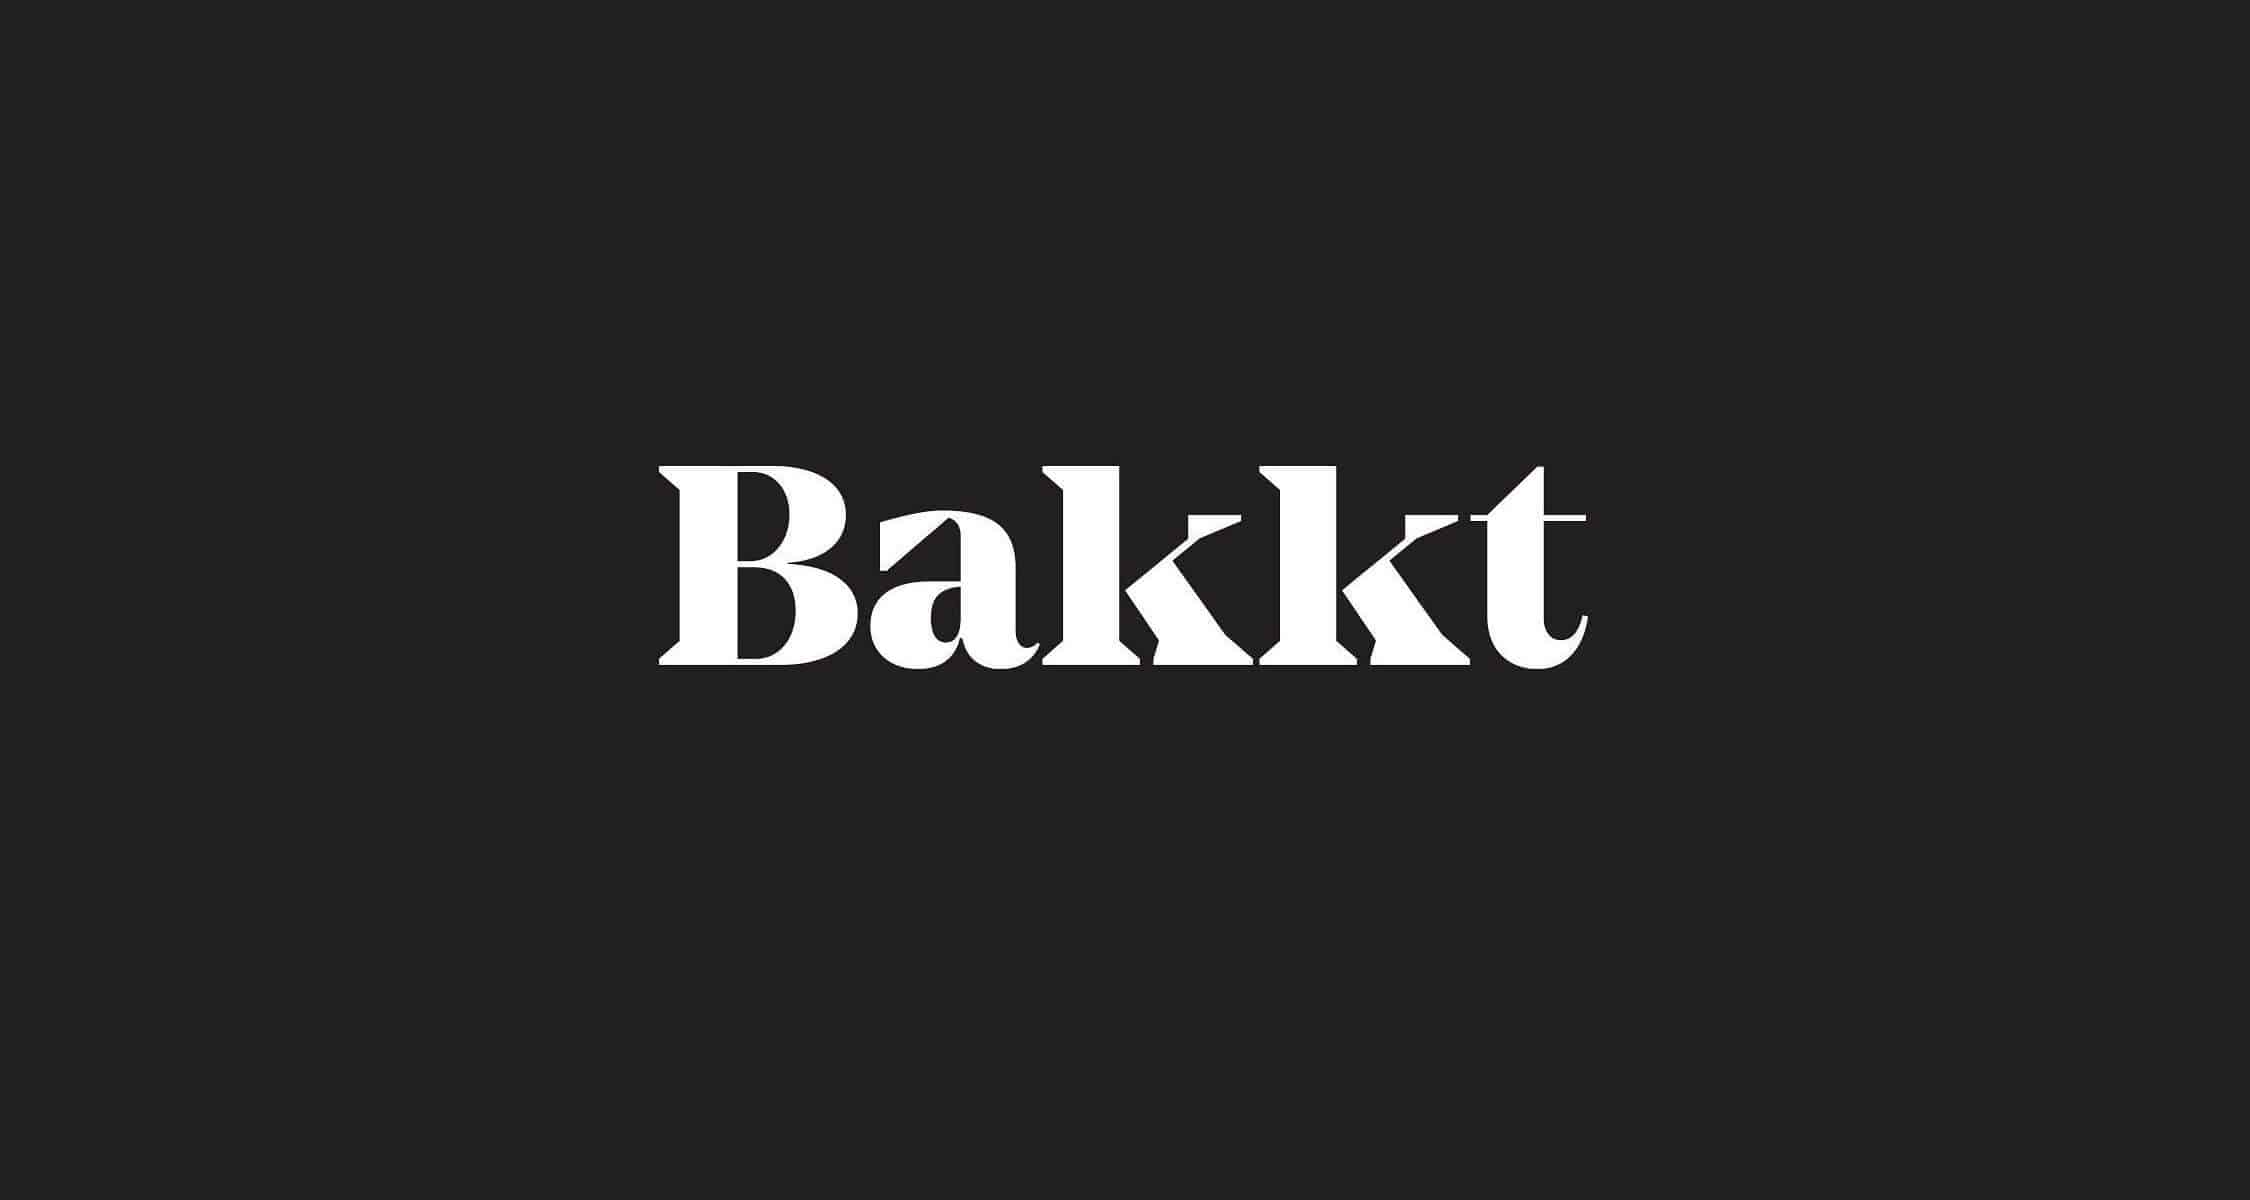 Bakkt’s Looks to Capitalize with Bitcoin Futures